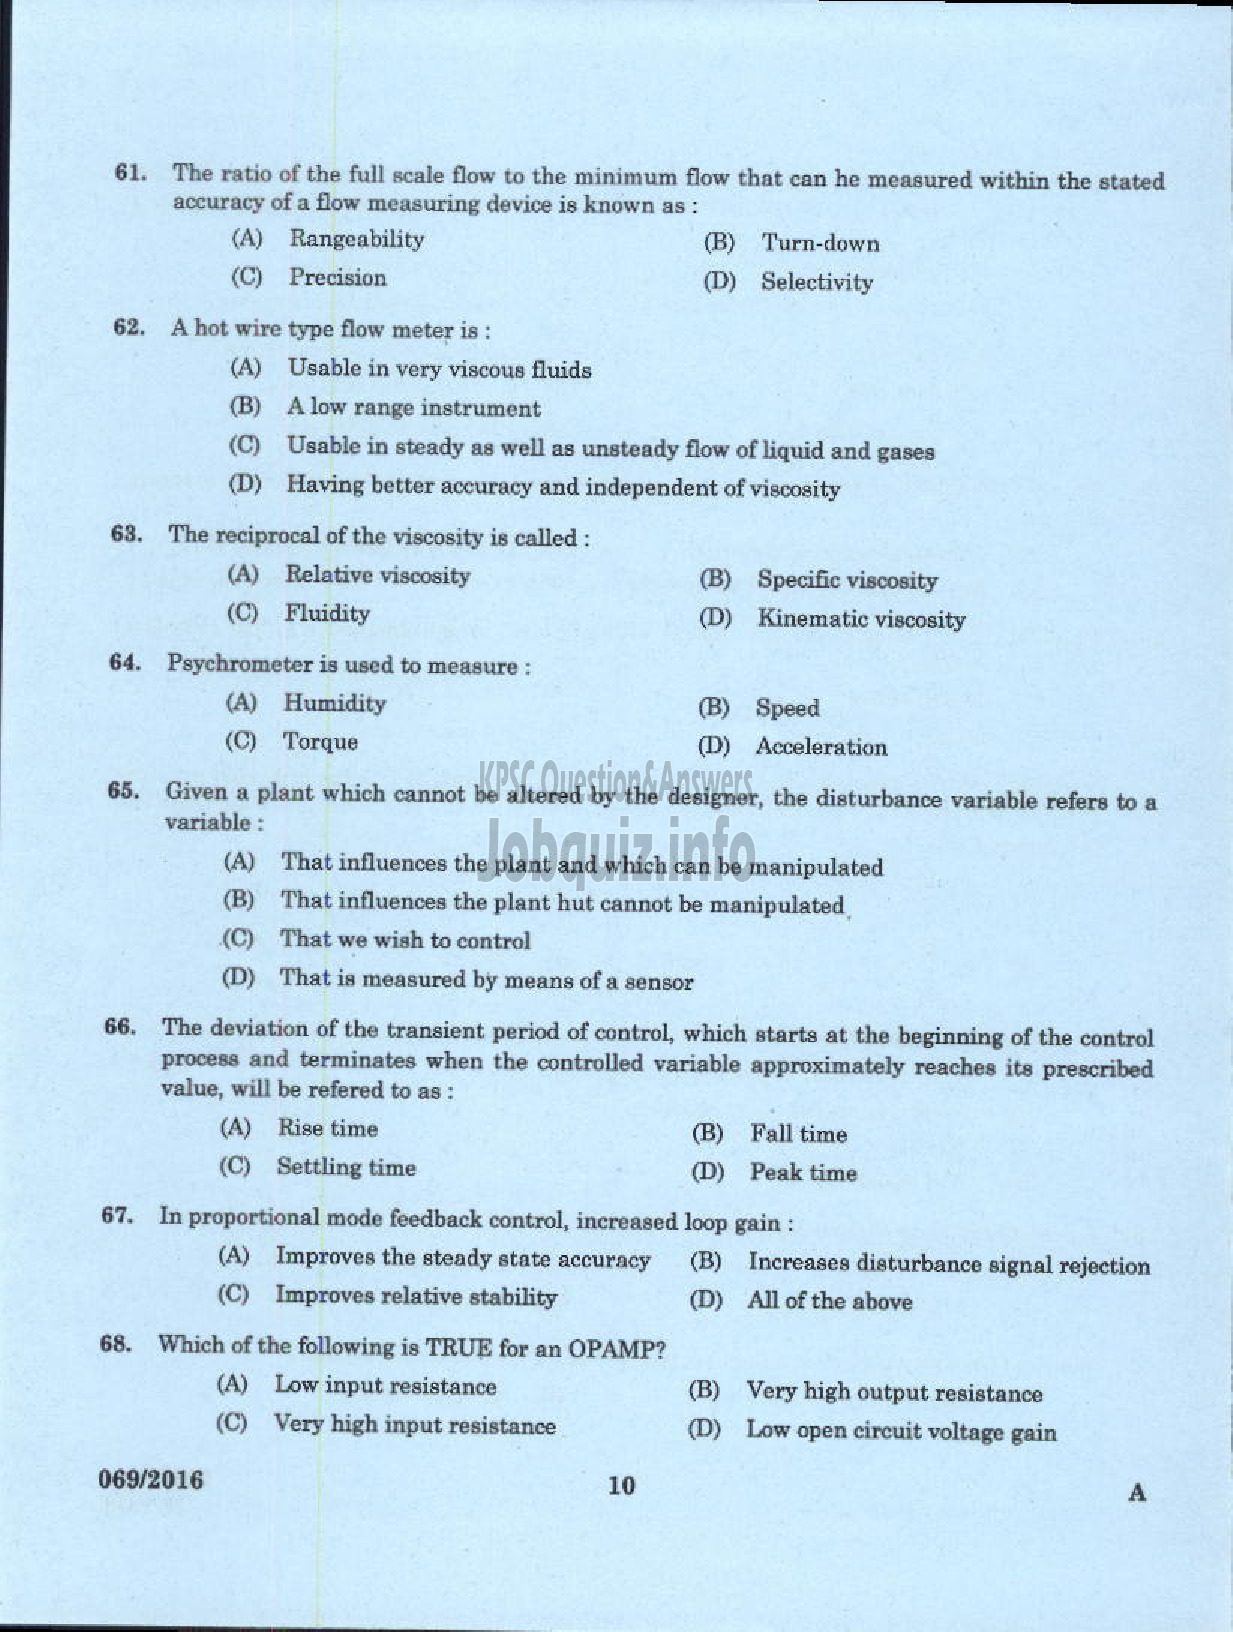 Kerala PSC Question Paper - LECTURER IN ELECTRONICS AND INSTRUMENTATION POLYTECHNICS TECHNICAL EDUCATION-8